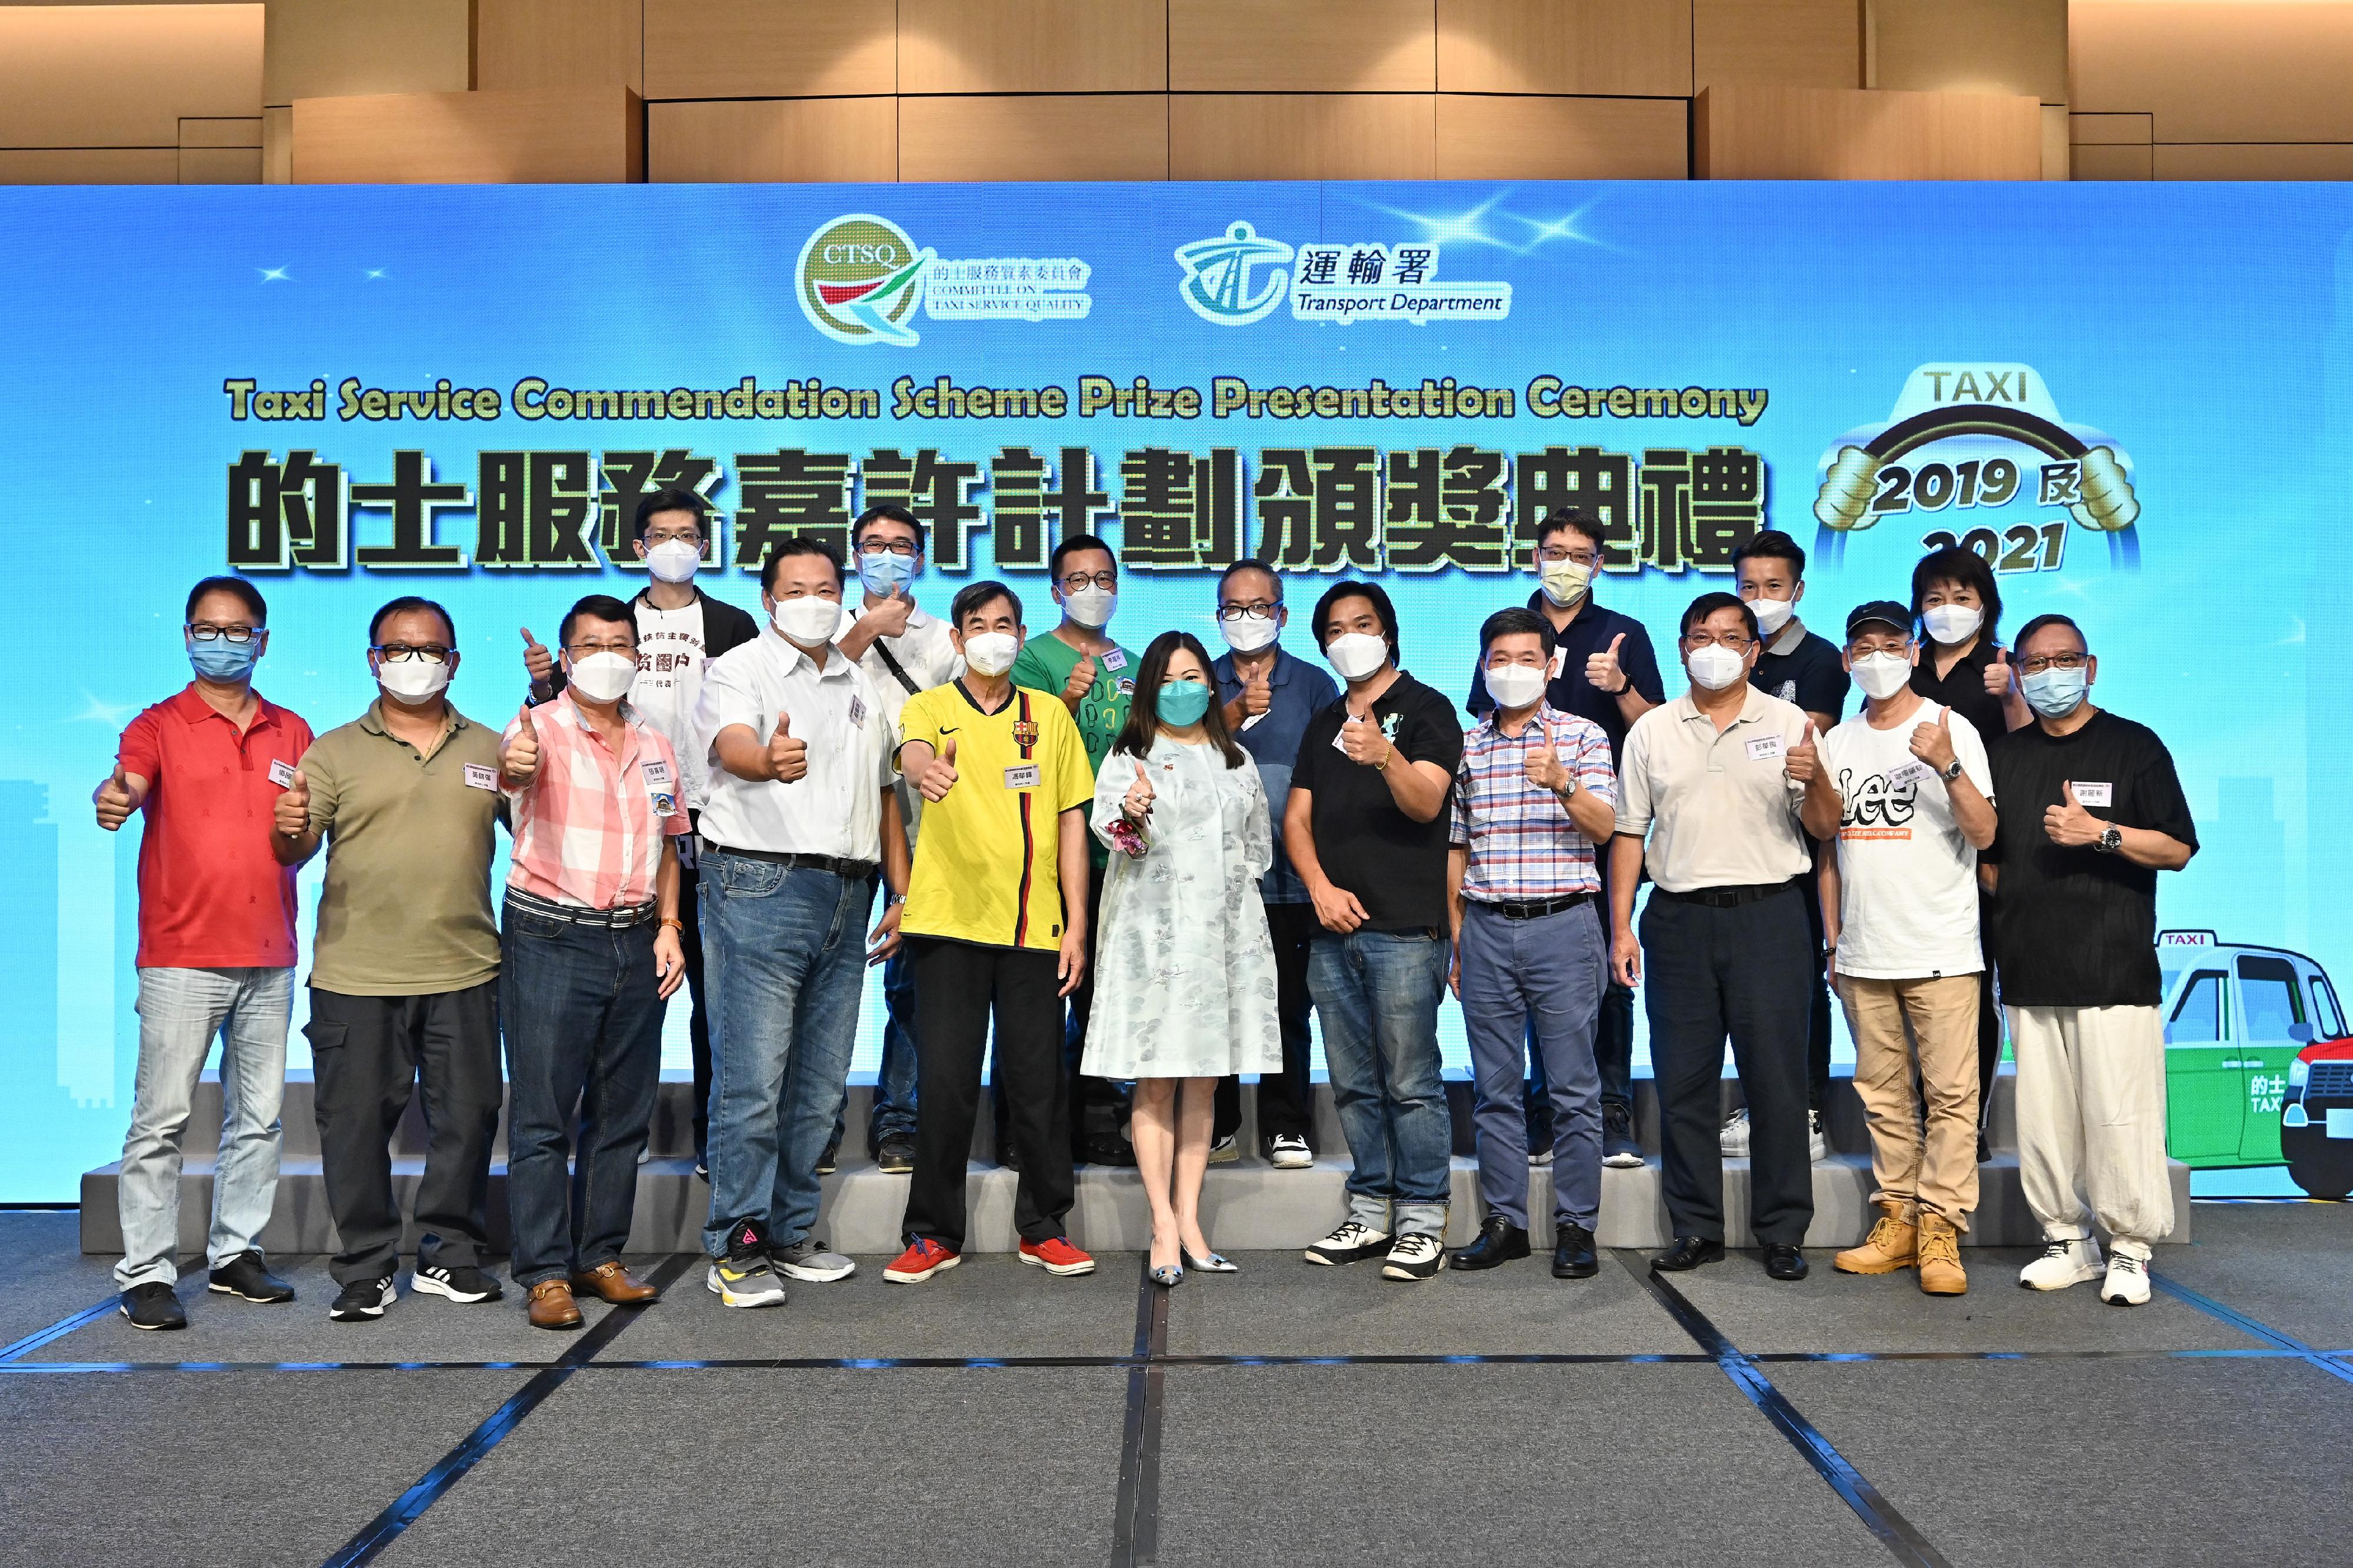 The prize presentation ceremony for the Taxi Service Commendation Scheme 2019 and 2021 was held today (June 24). The Committee on Taxi Service Quality Chairman and the Commissioner for Transport, Miss Rosanna Law (front row, centre), is pictured with "Quality Taxi Drivers" and "Most Popular Taxi Driver" awardees of 2021 at the ceremony.